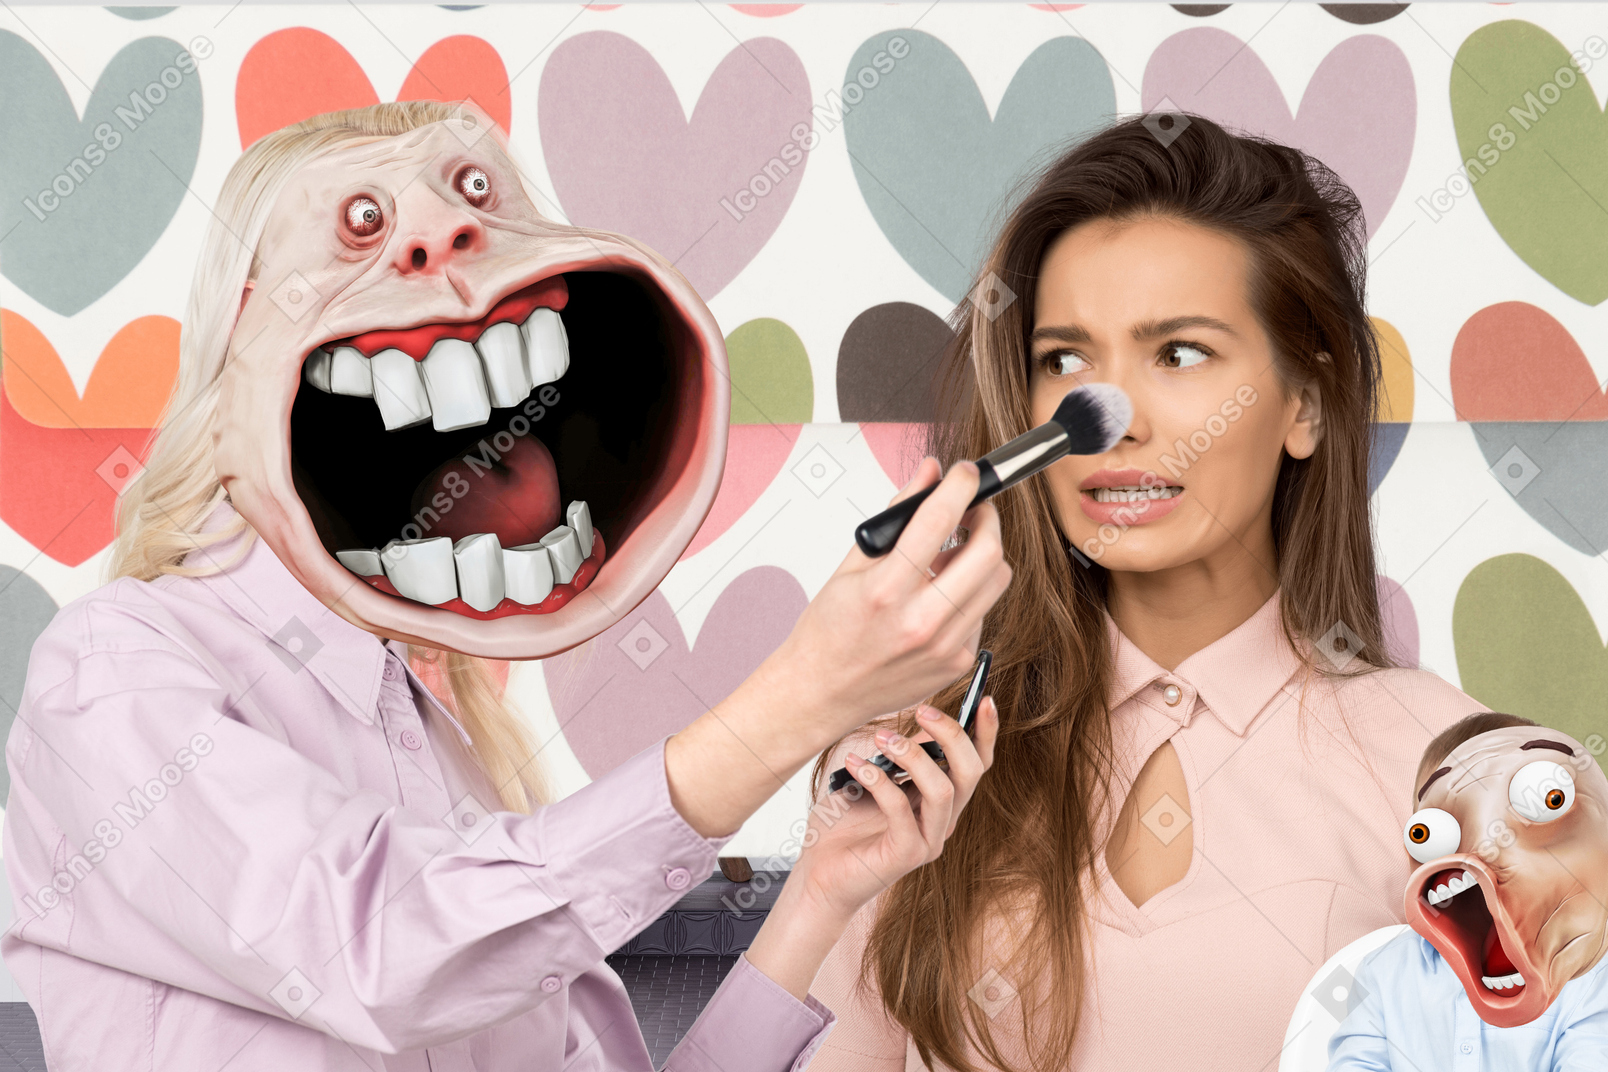 Forever alone putting makeup on a woman